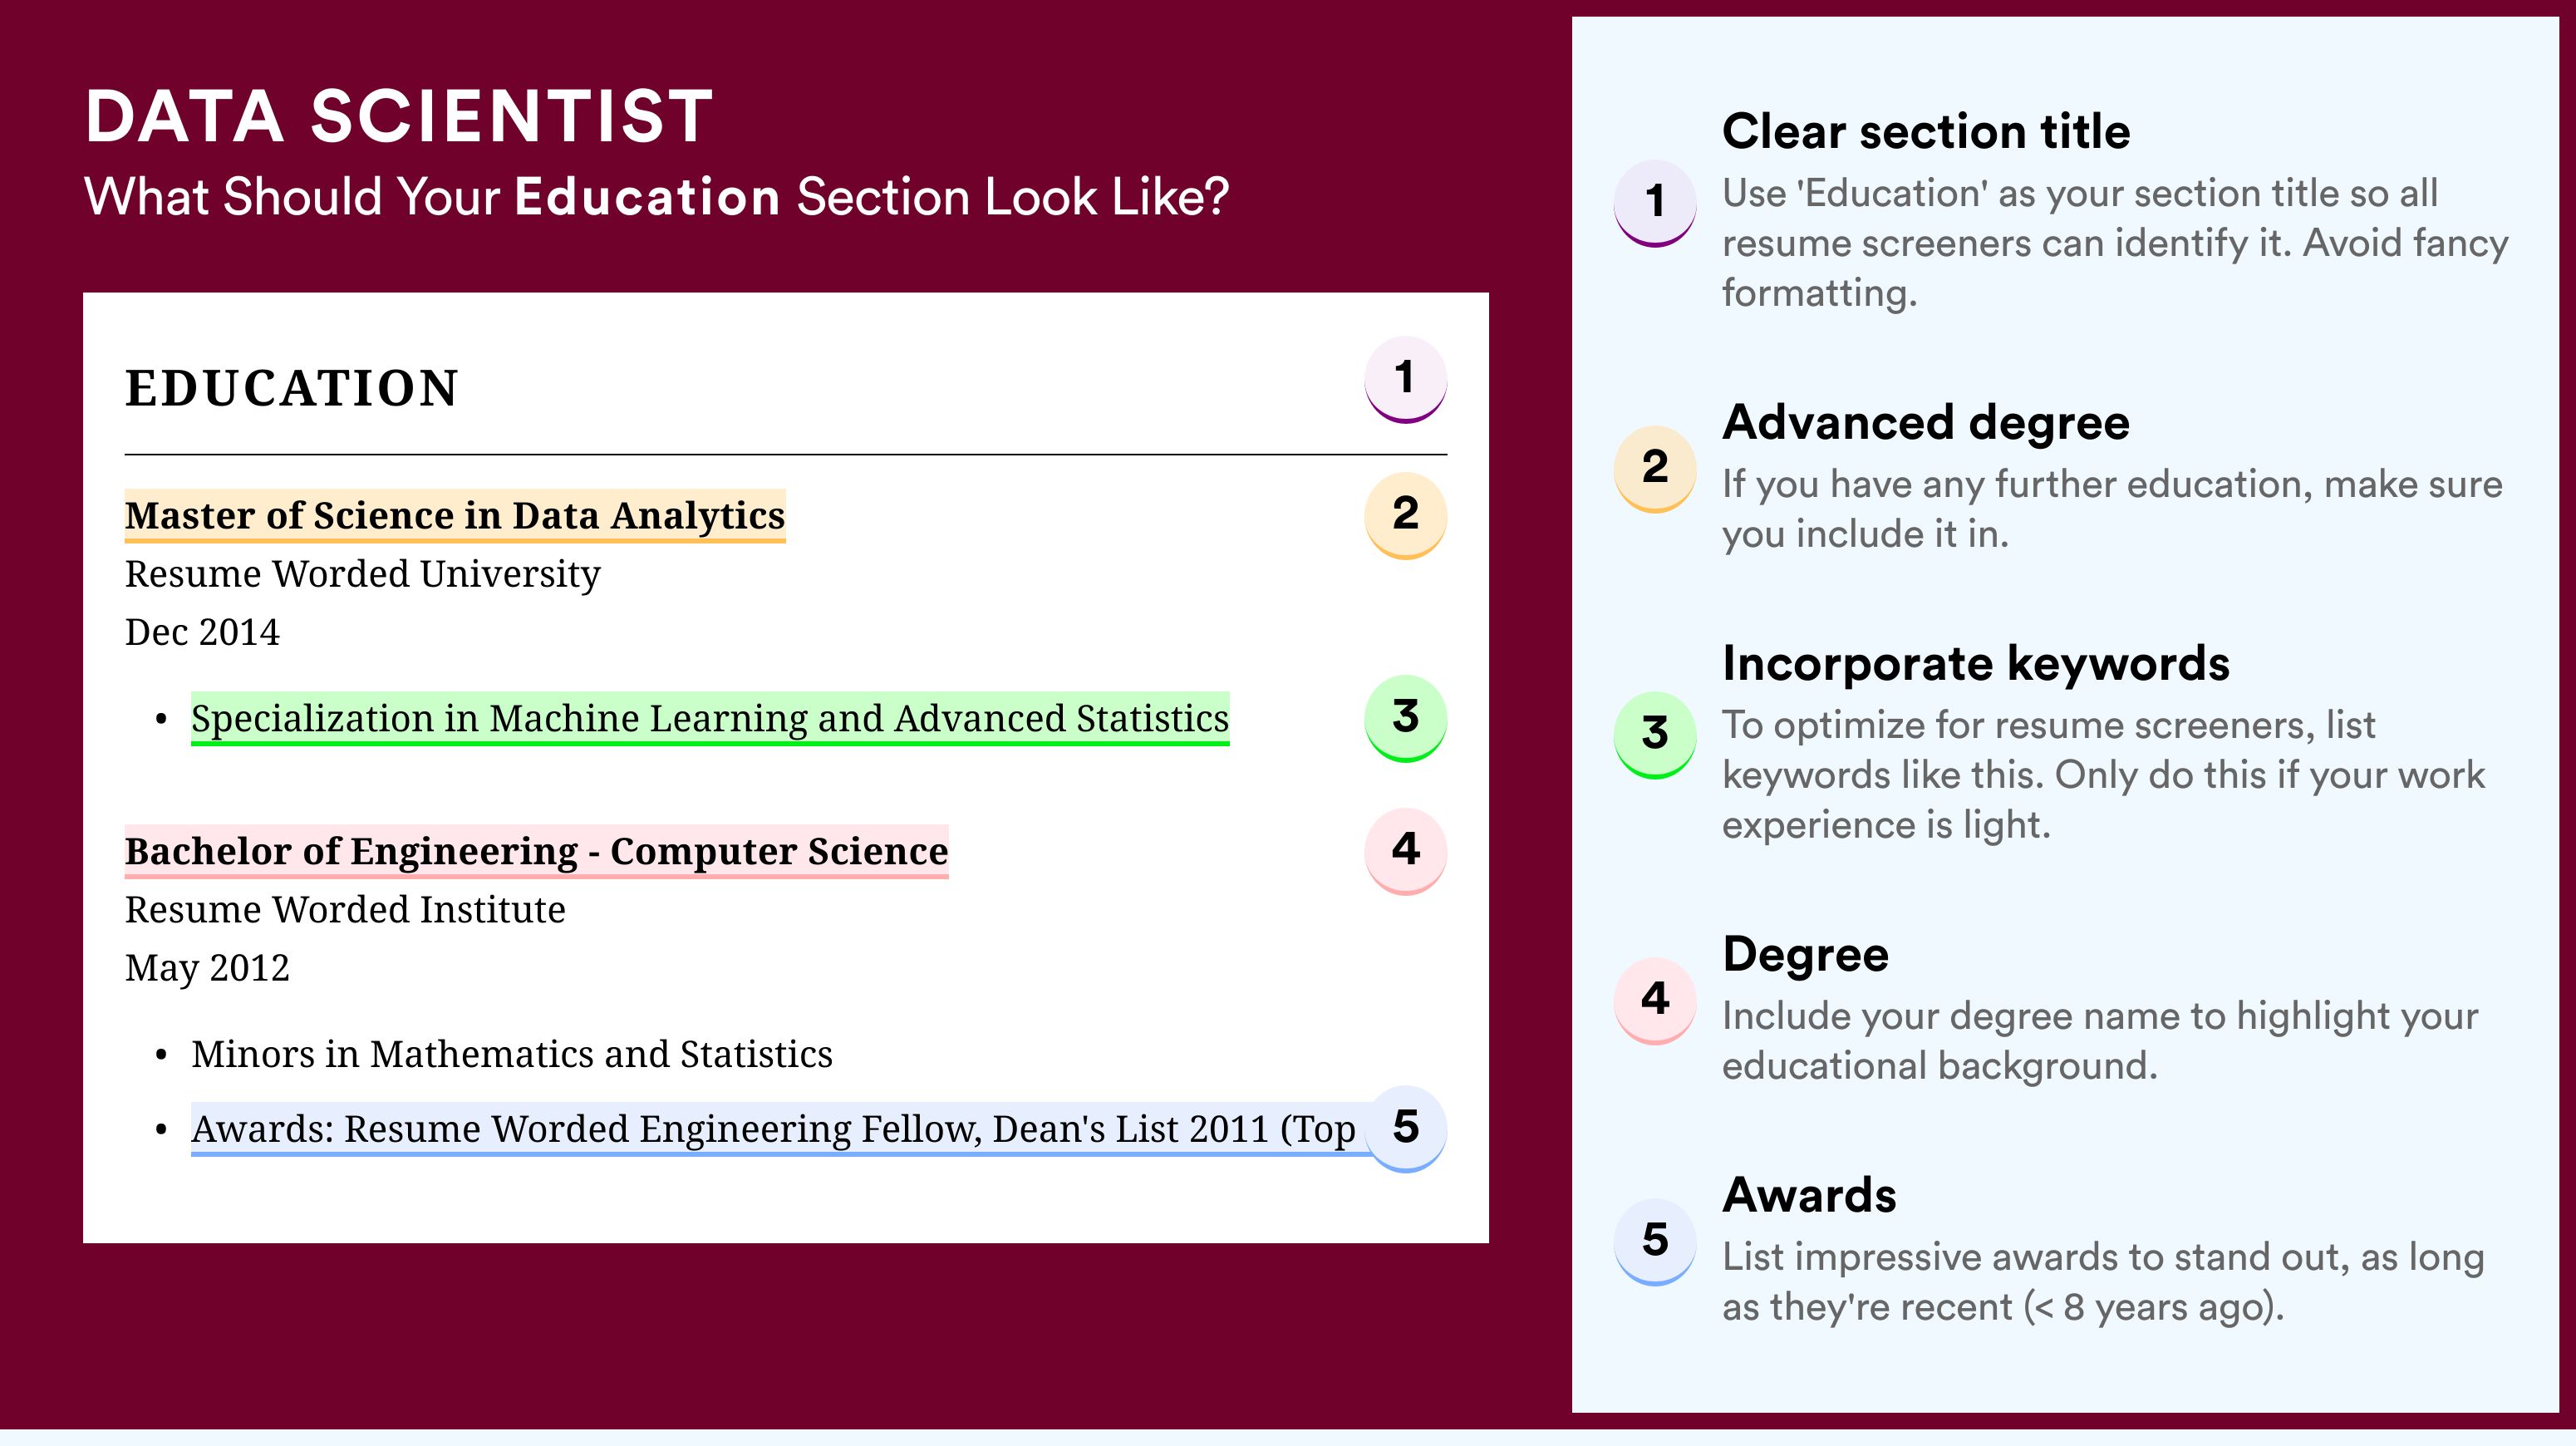 How To Write An Education Section - Data Scientist Roles